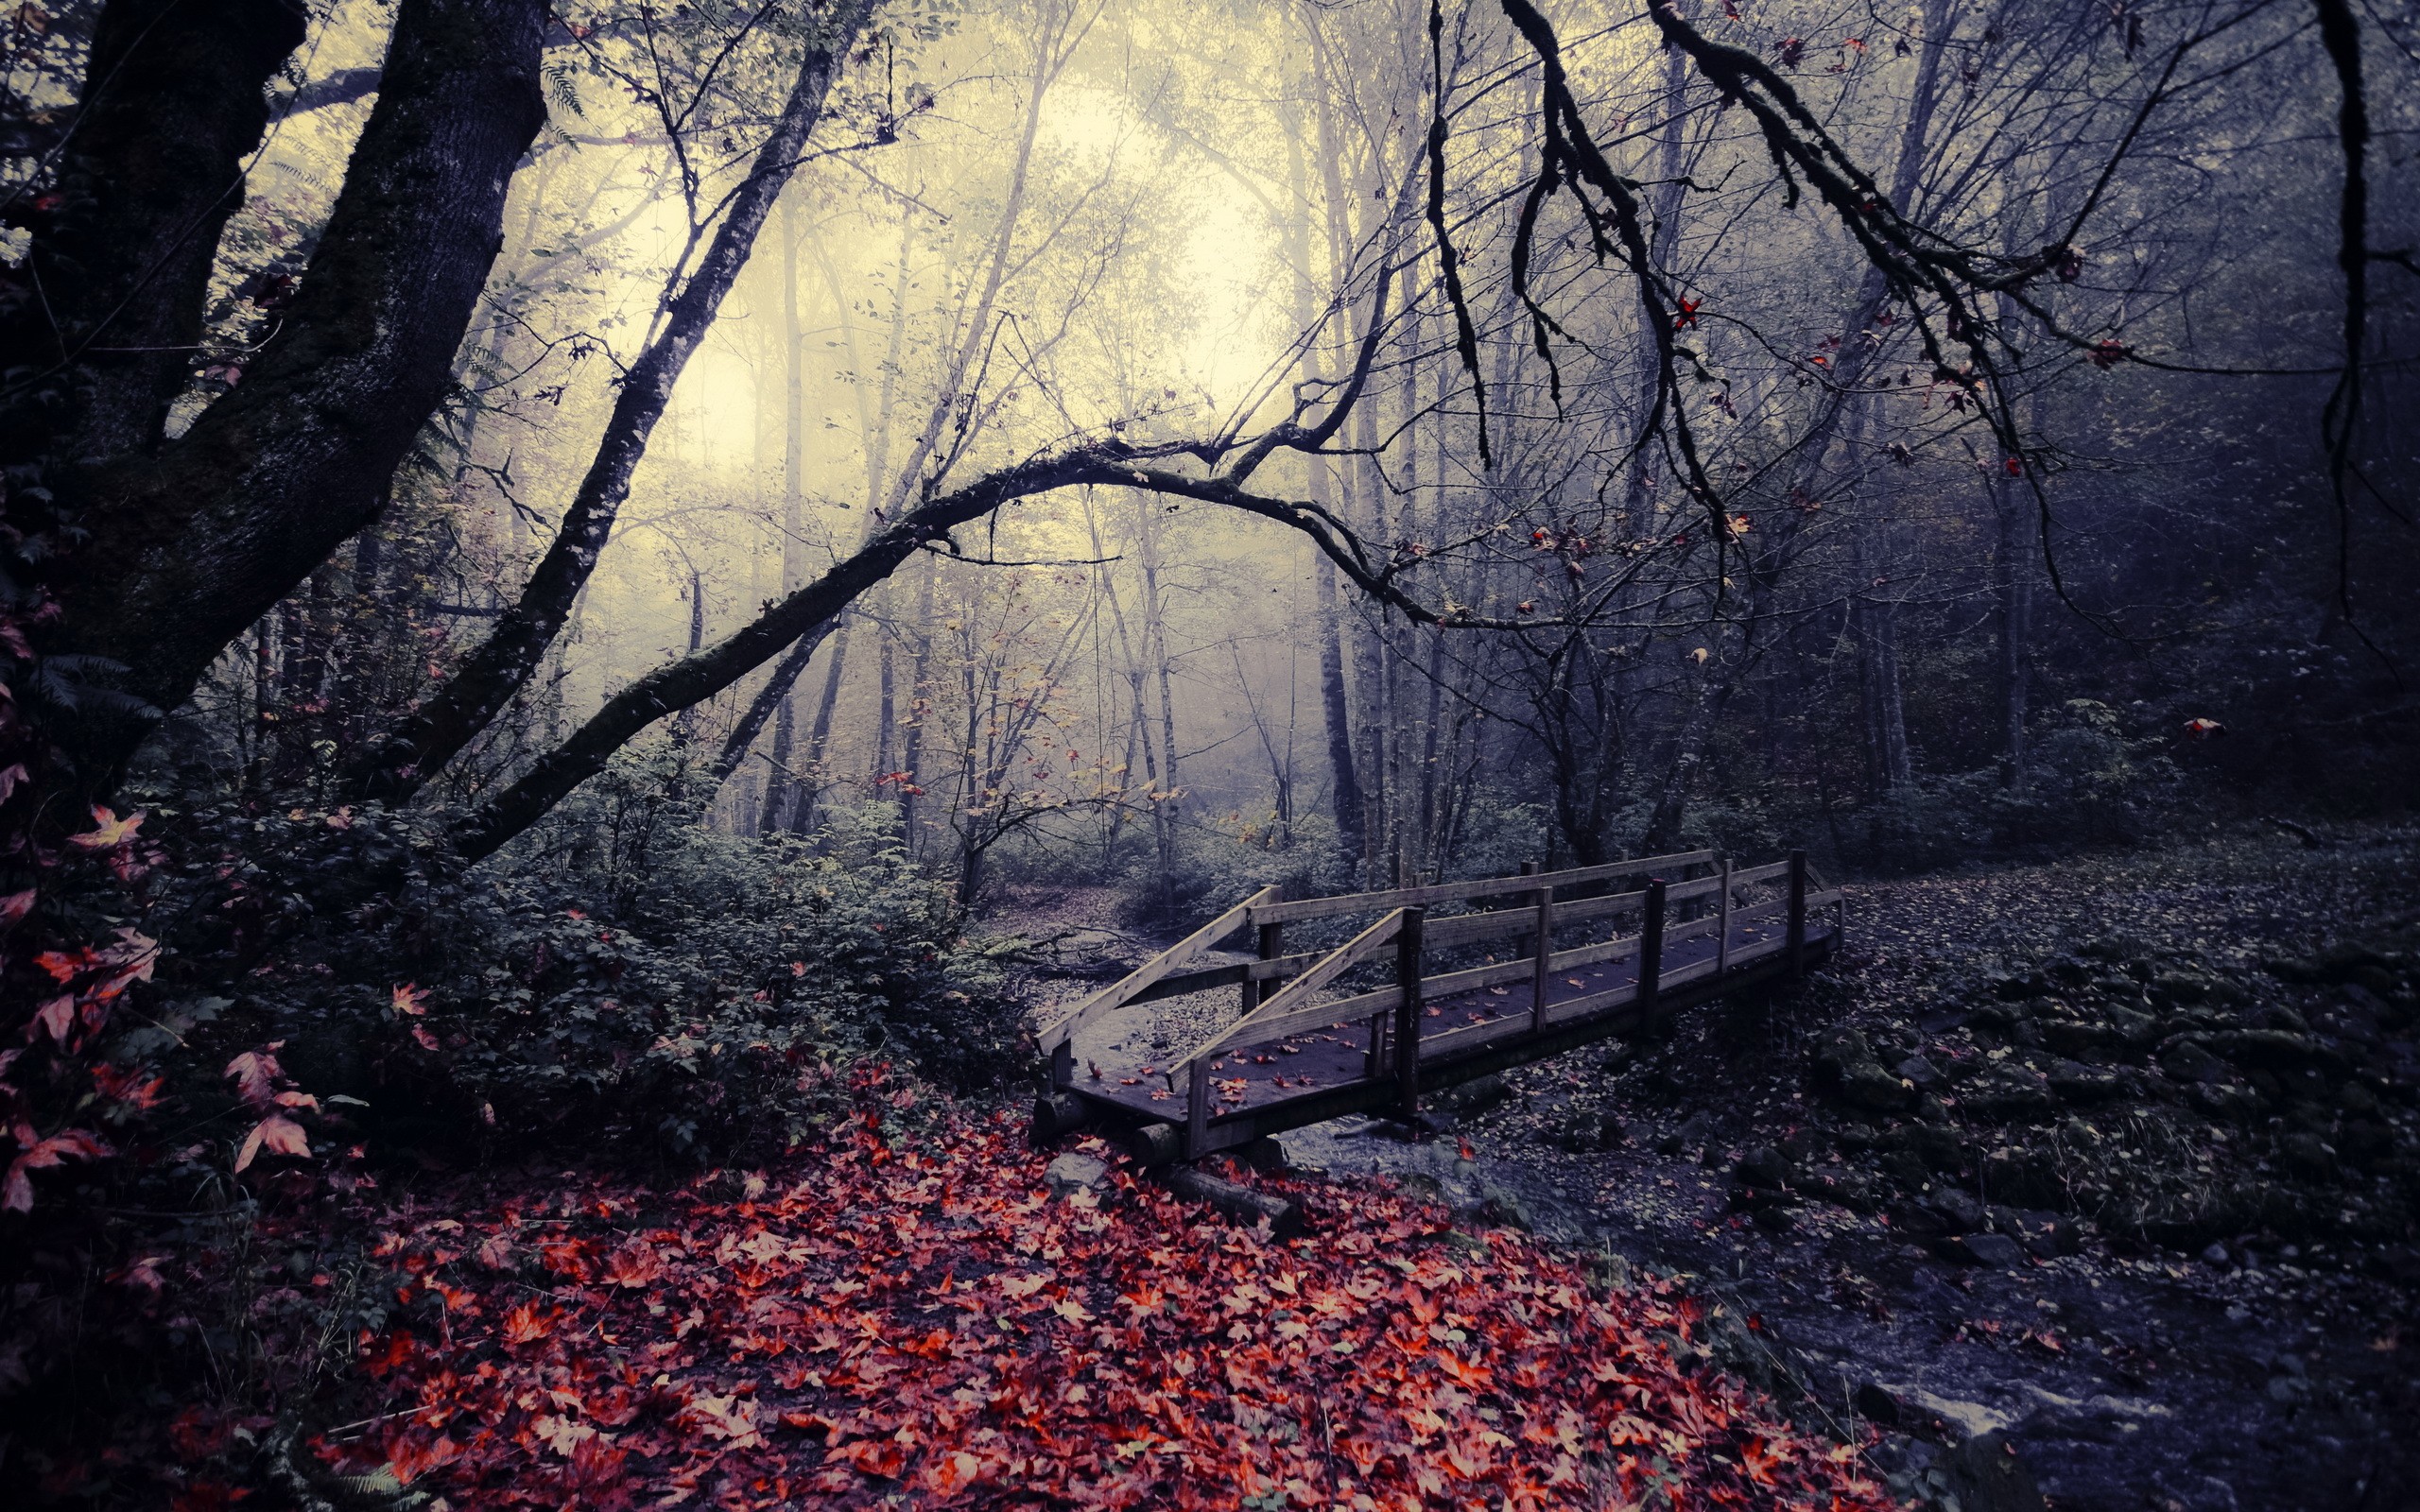 General 2560x1600 nature landscape leaves bridge trees river fallen leaves fall forest outdoors gloomy